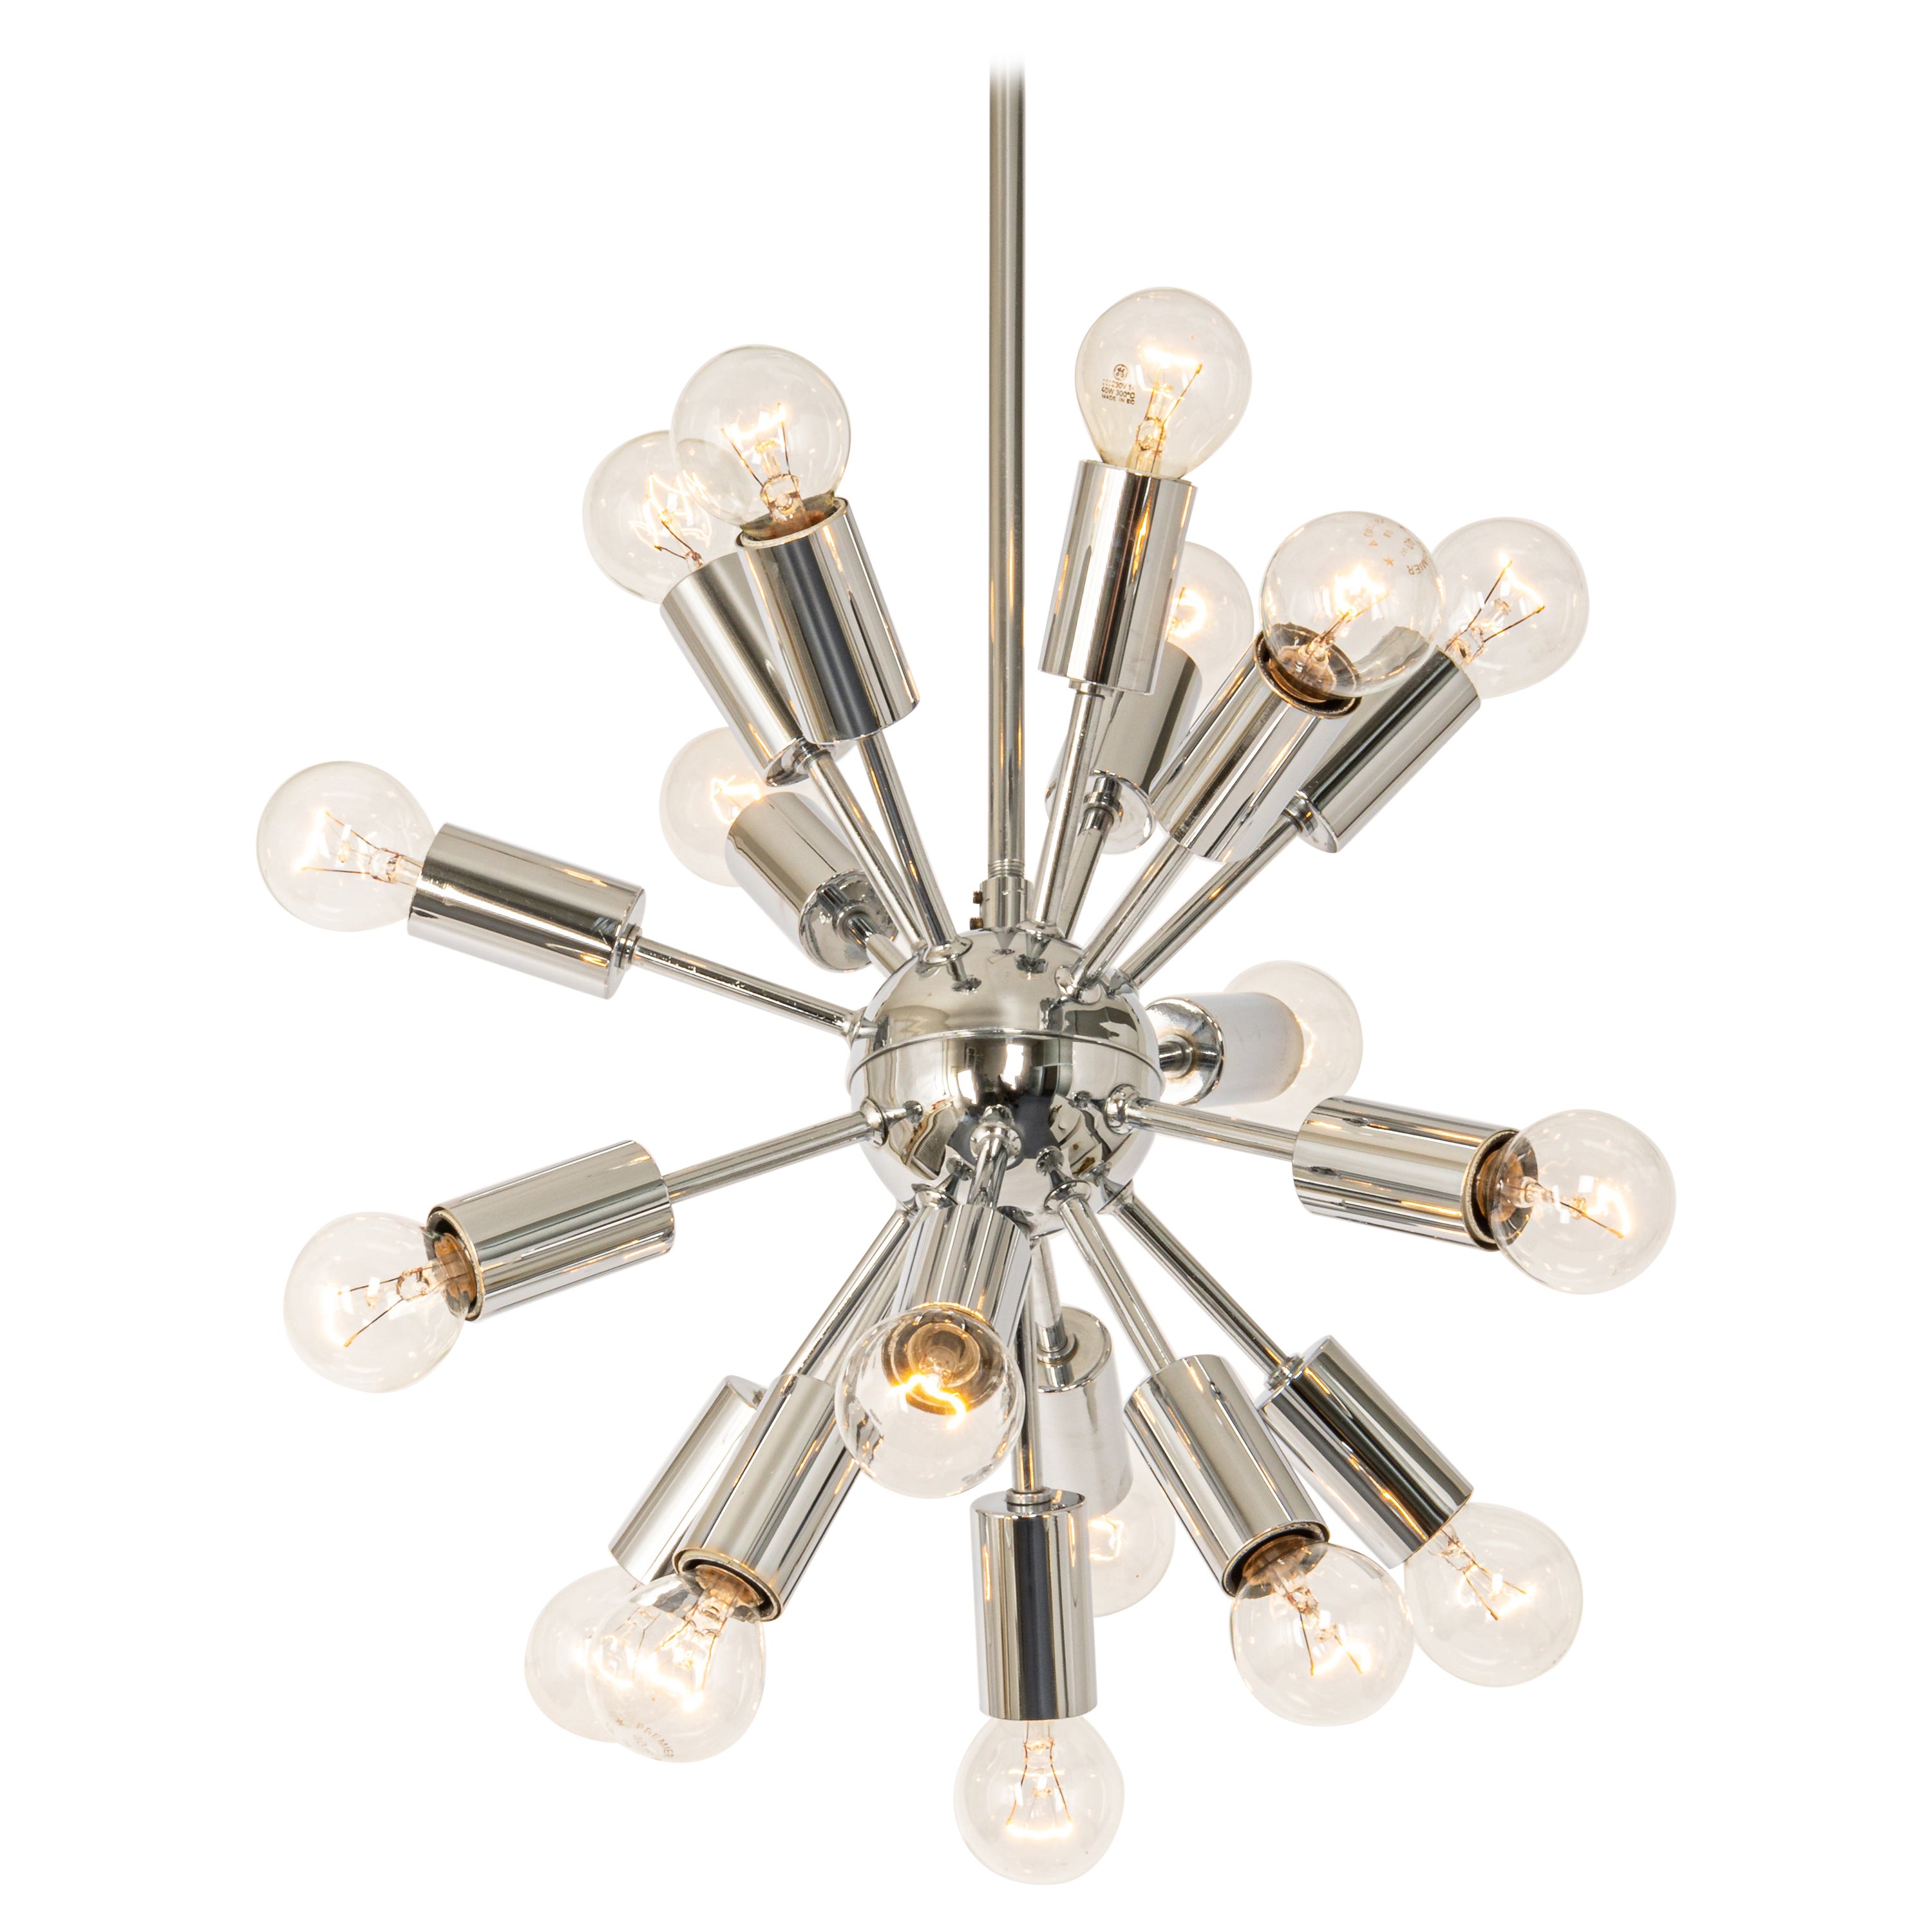 Petite Chrome Space Age Sputnik Atomium Pendant by Cosack, Germany, 1970s For Sale